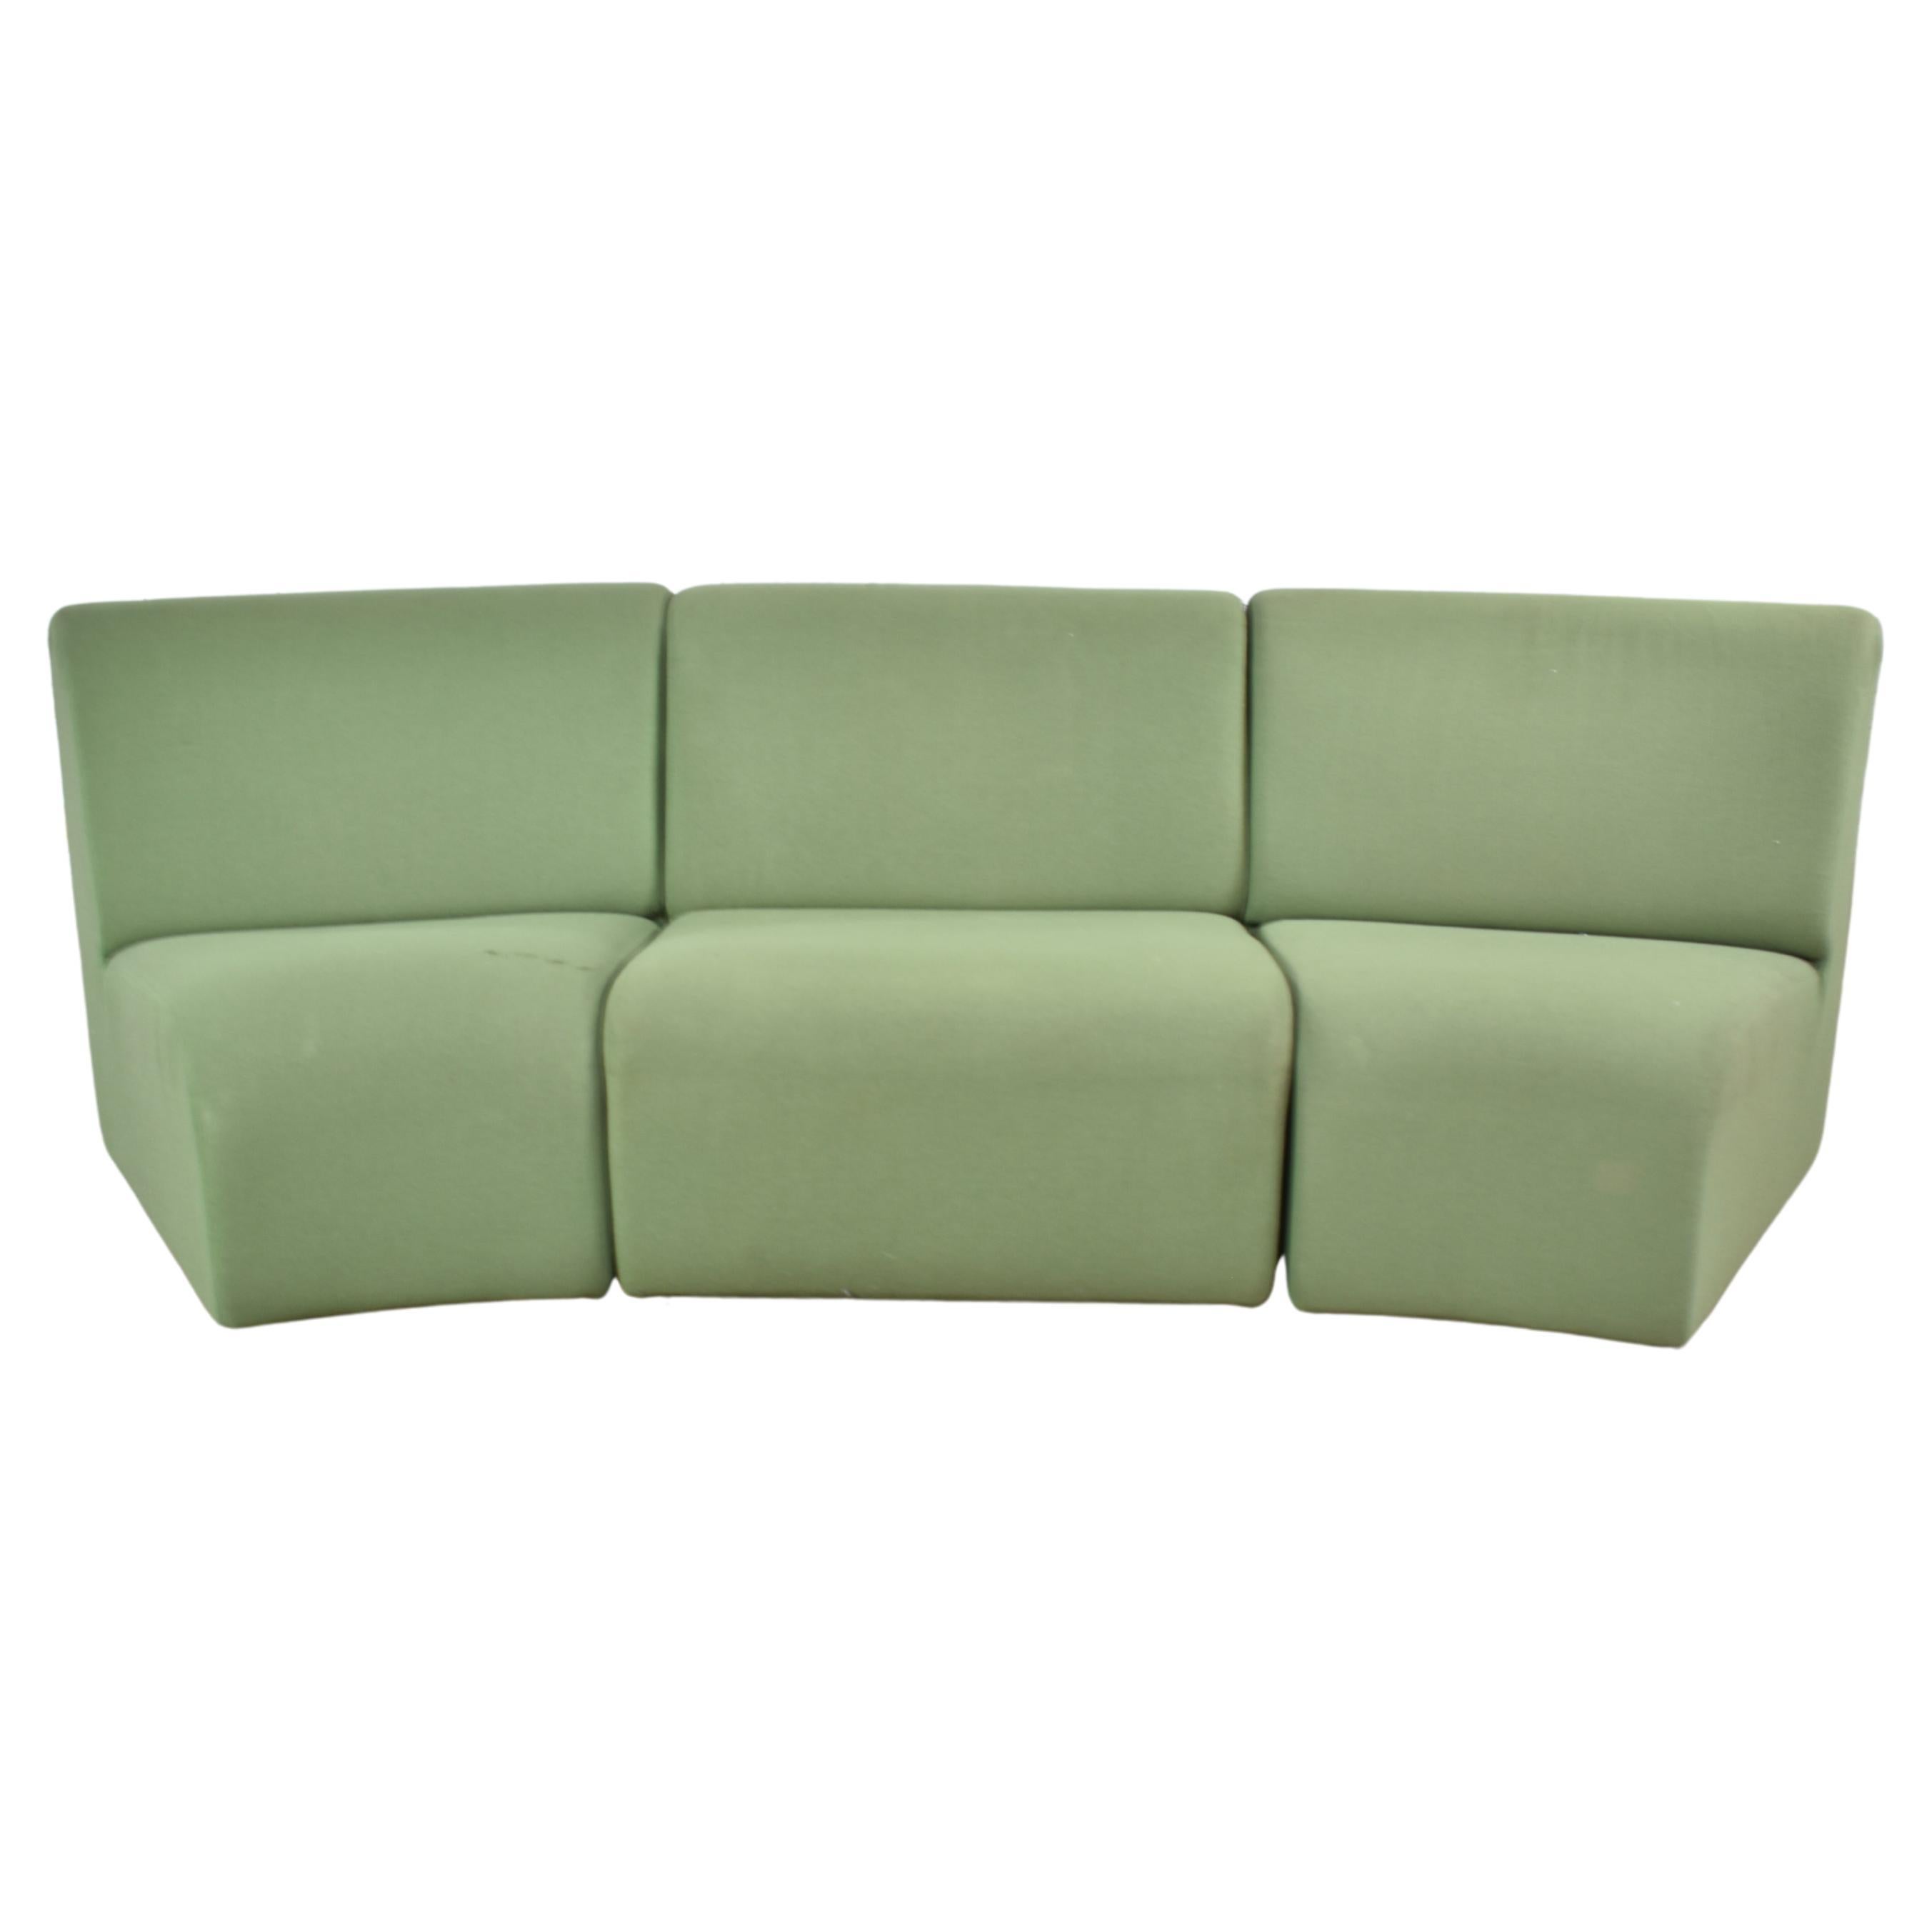 August Inc Modern Modular Sectional Sofa Straight & Wedge Pieces Style Chadwick